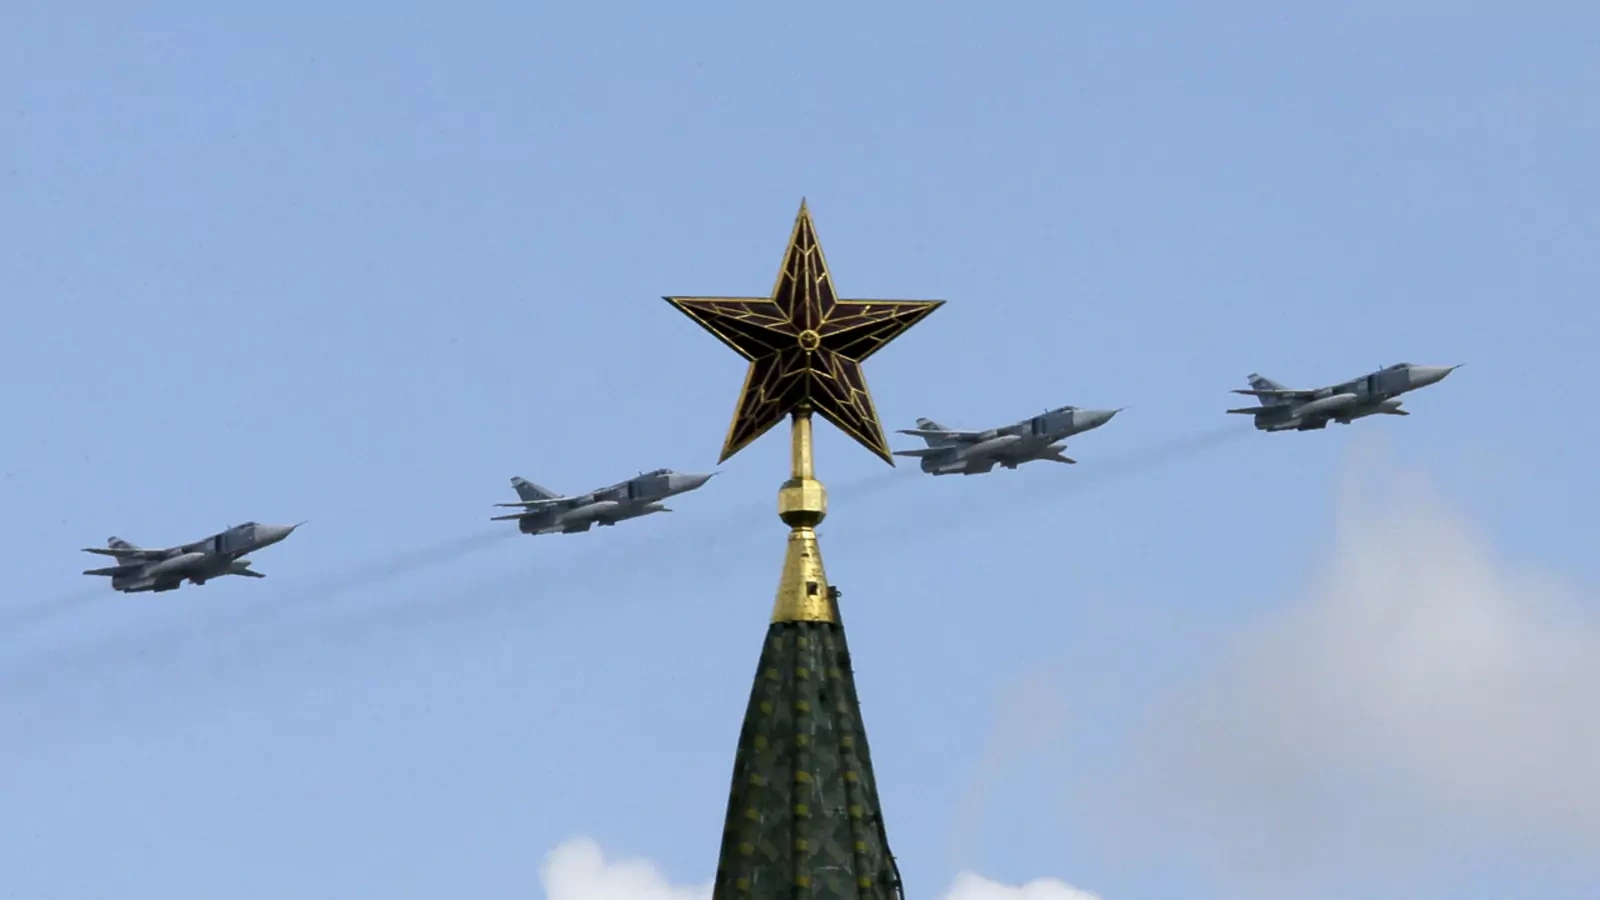 Russian jets fly in formation during rehearsals for the Victory Day military parade, with a tower of the Kremlin seen in the foreground, May 3, 2014.